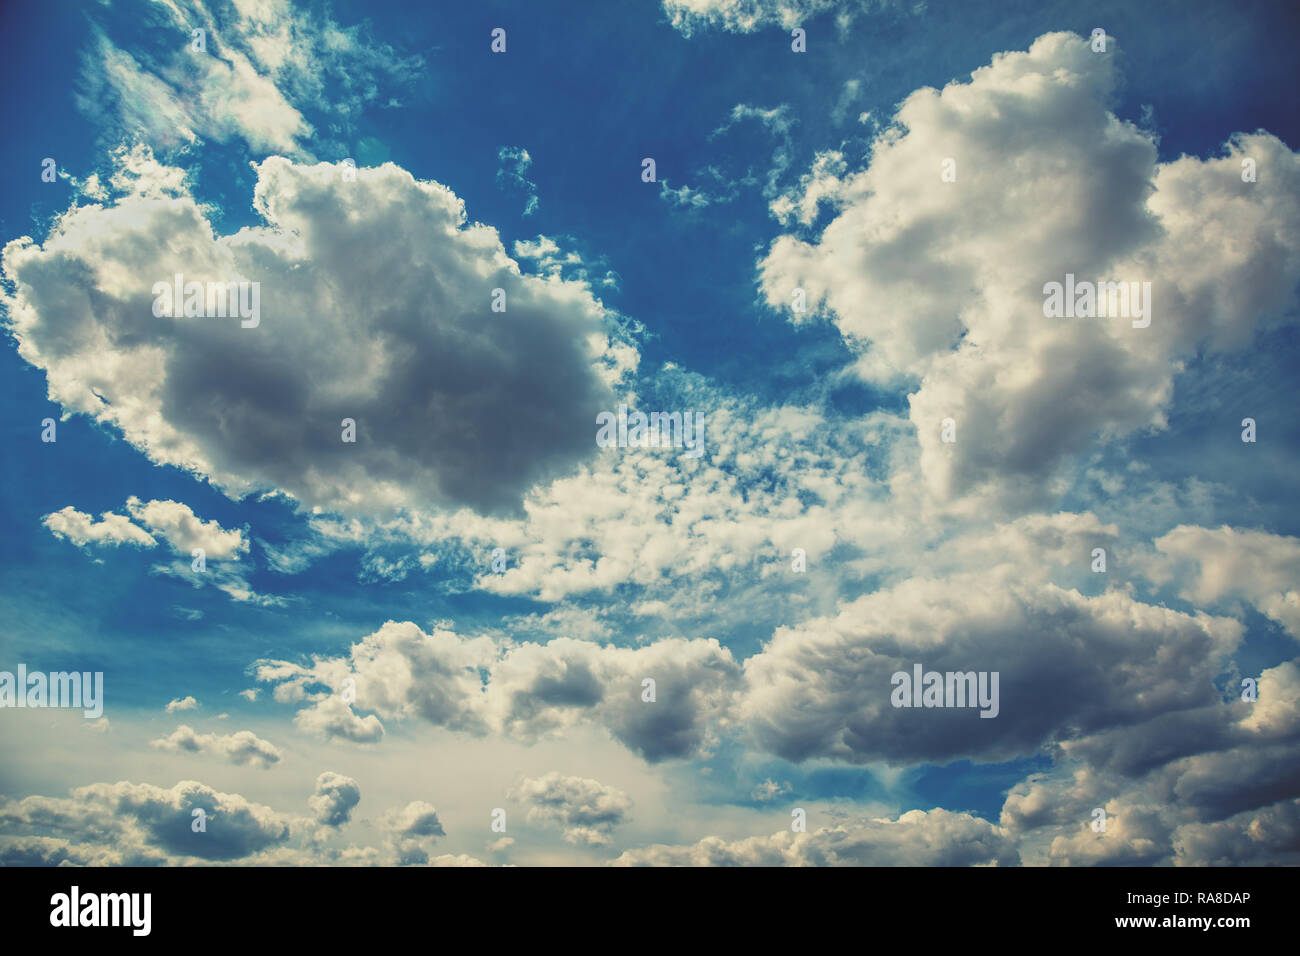 Blue sky with white clouds. Abstract nature background Stock Photo